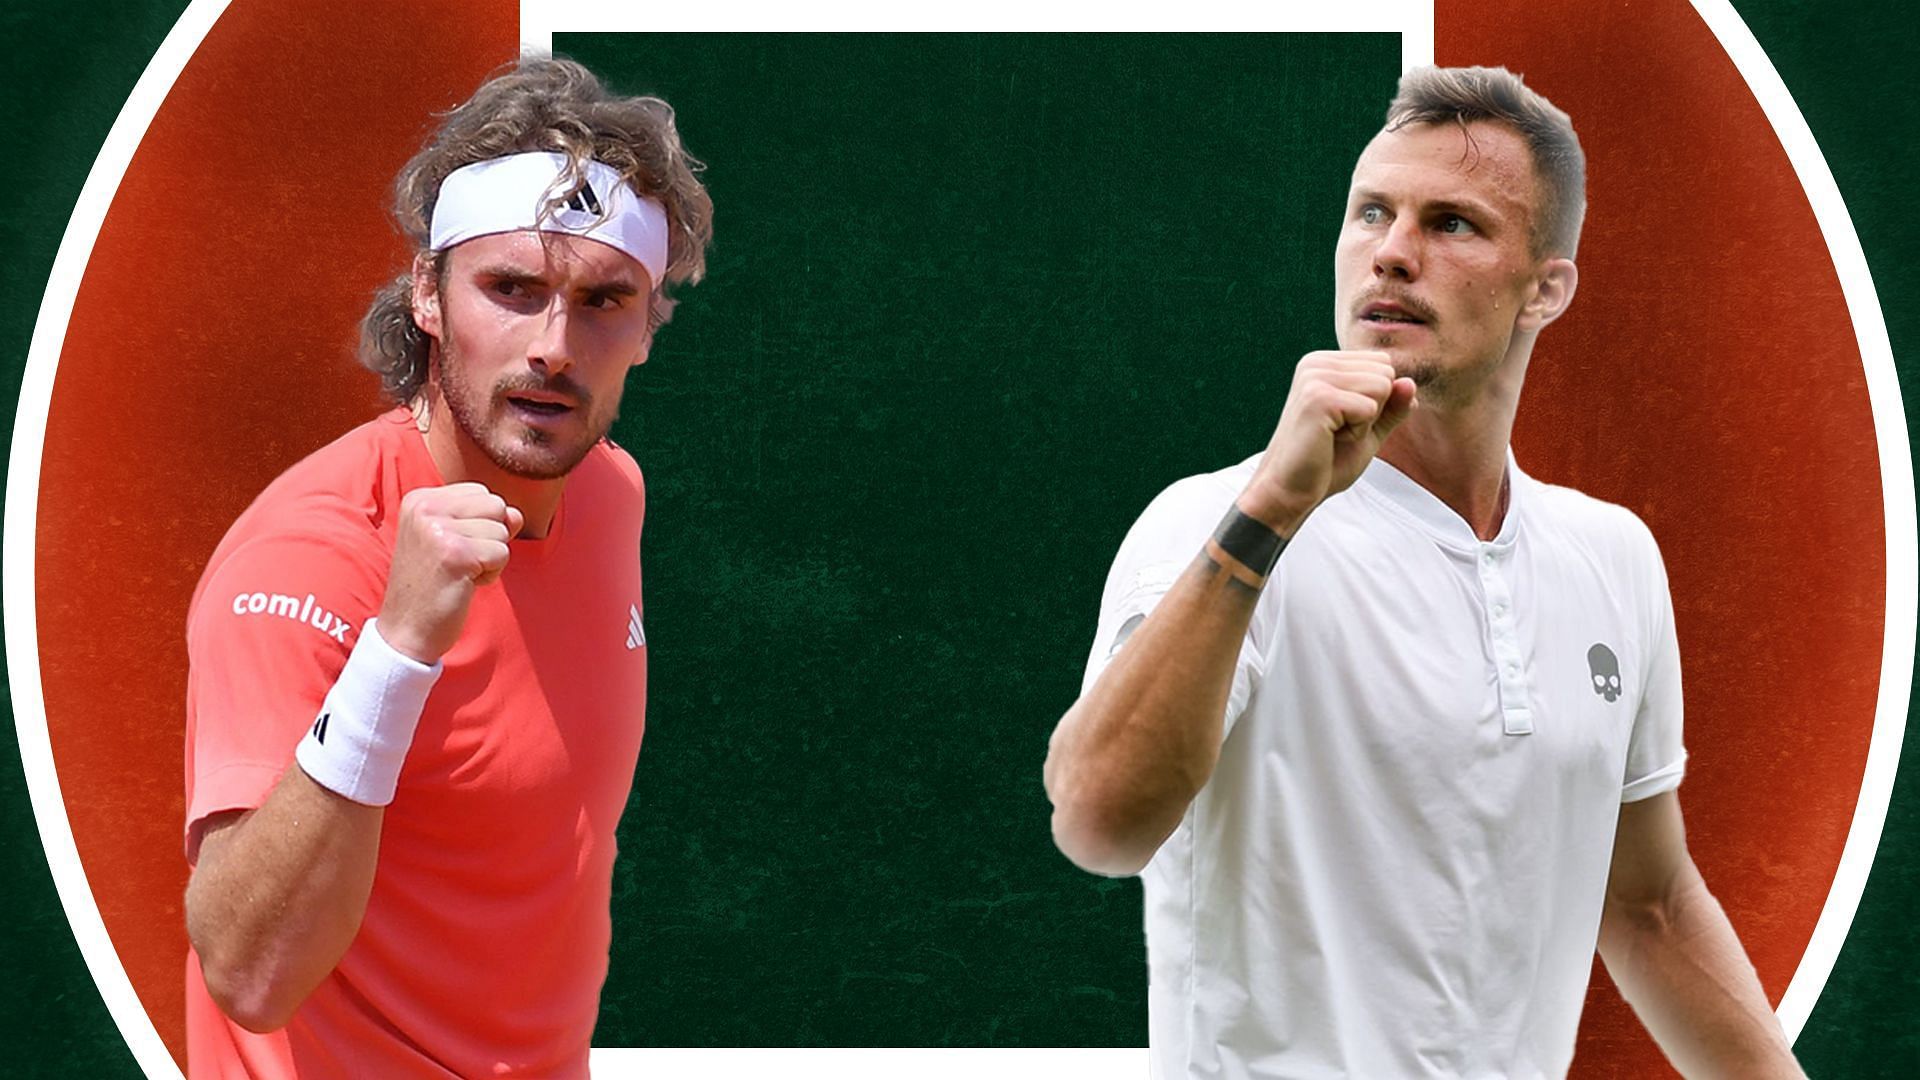 Stefanos Tsitsipas vs Marton Fucsovics is one of the first-round matches at the French Open